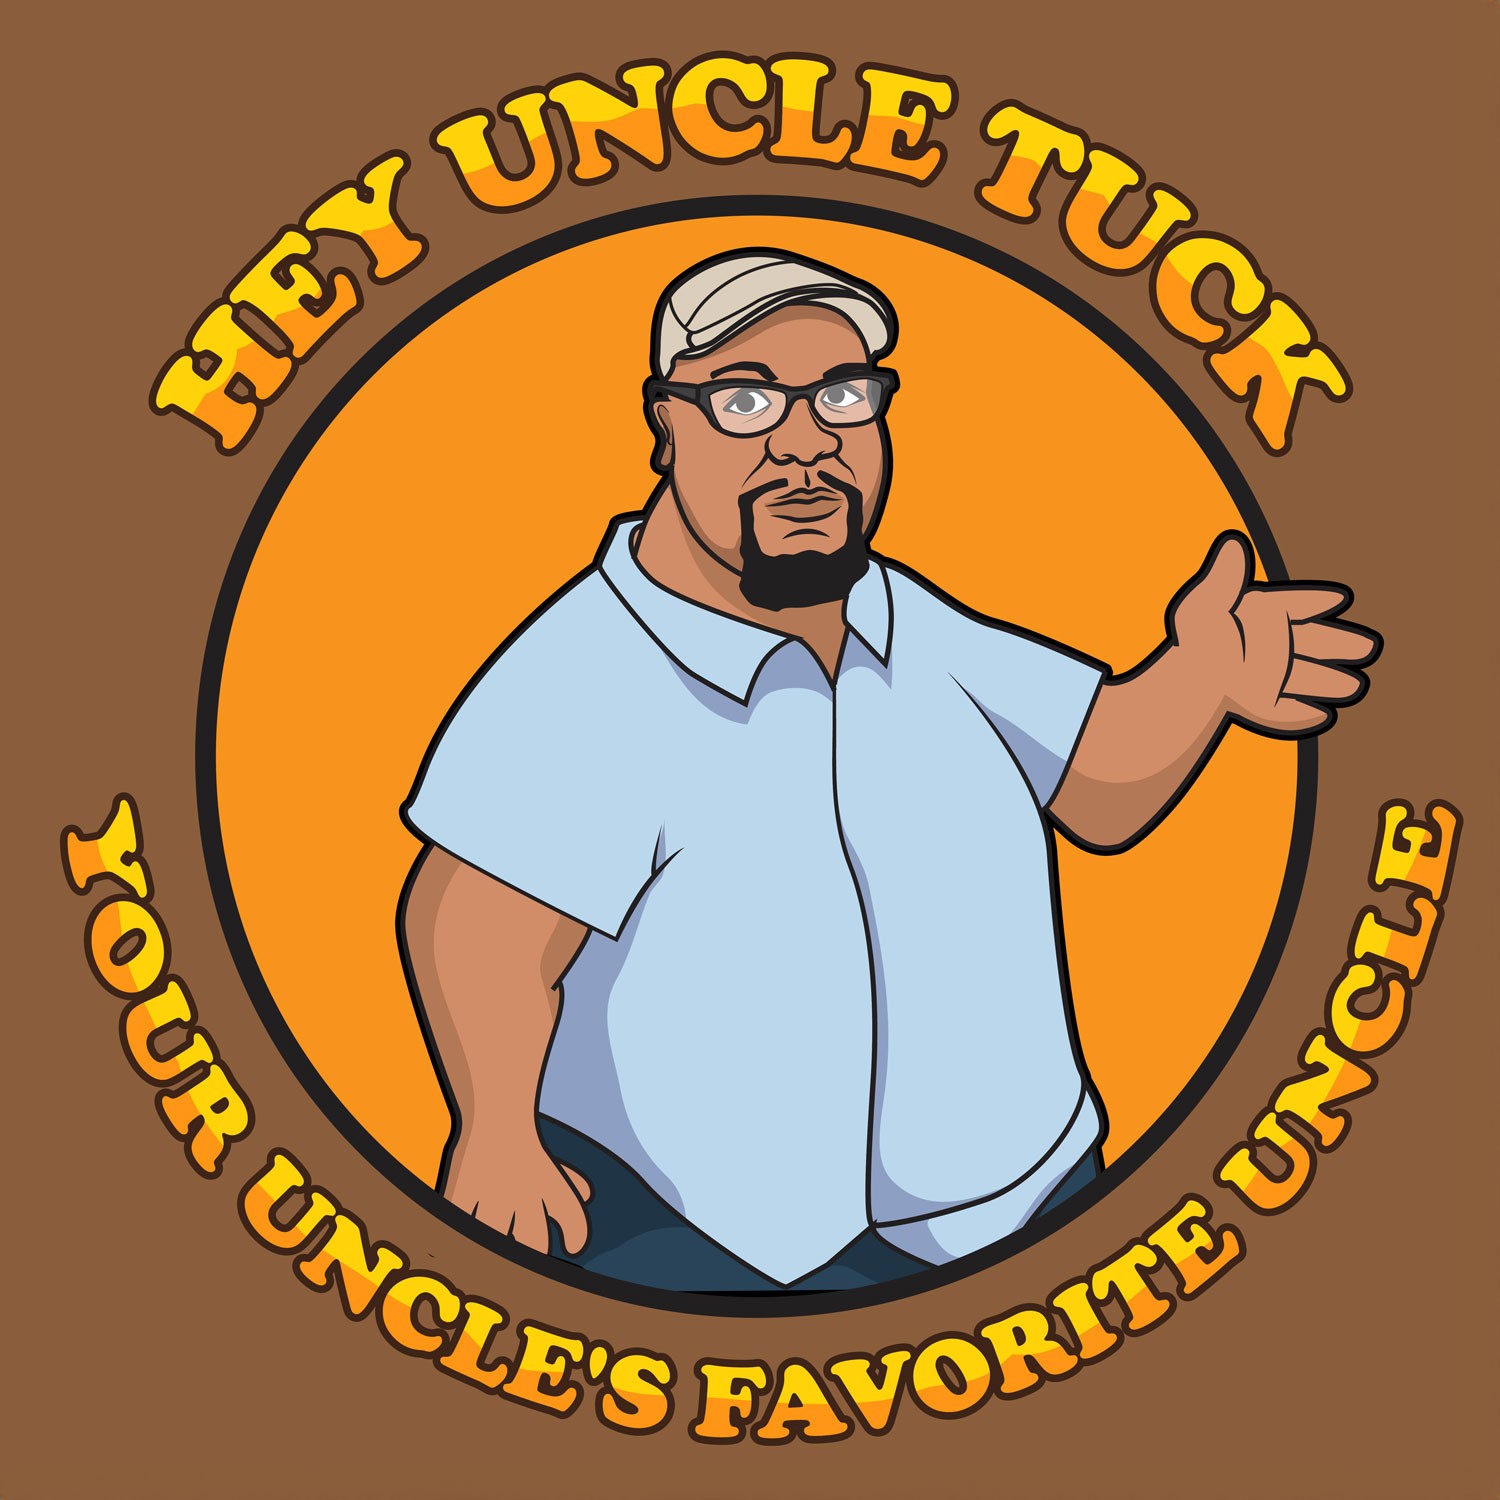 Hey Uncle Tuck, Your Uncle’s Favorite Uncle!